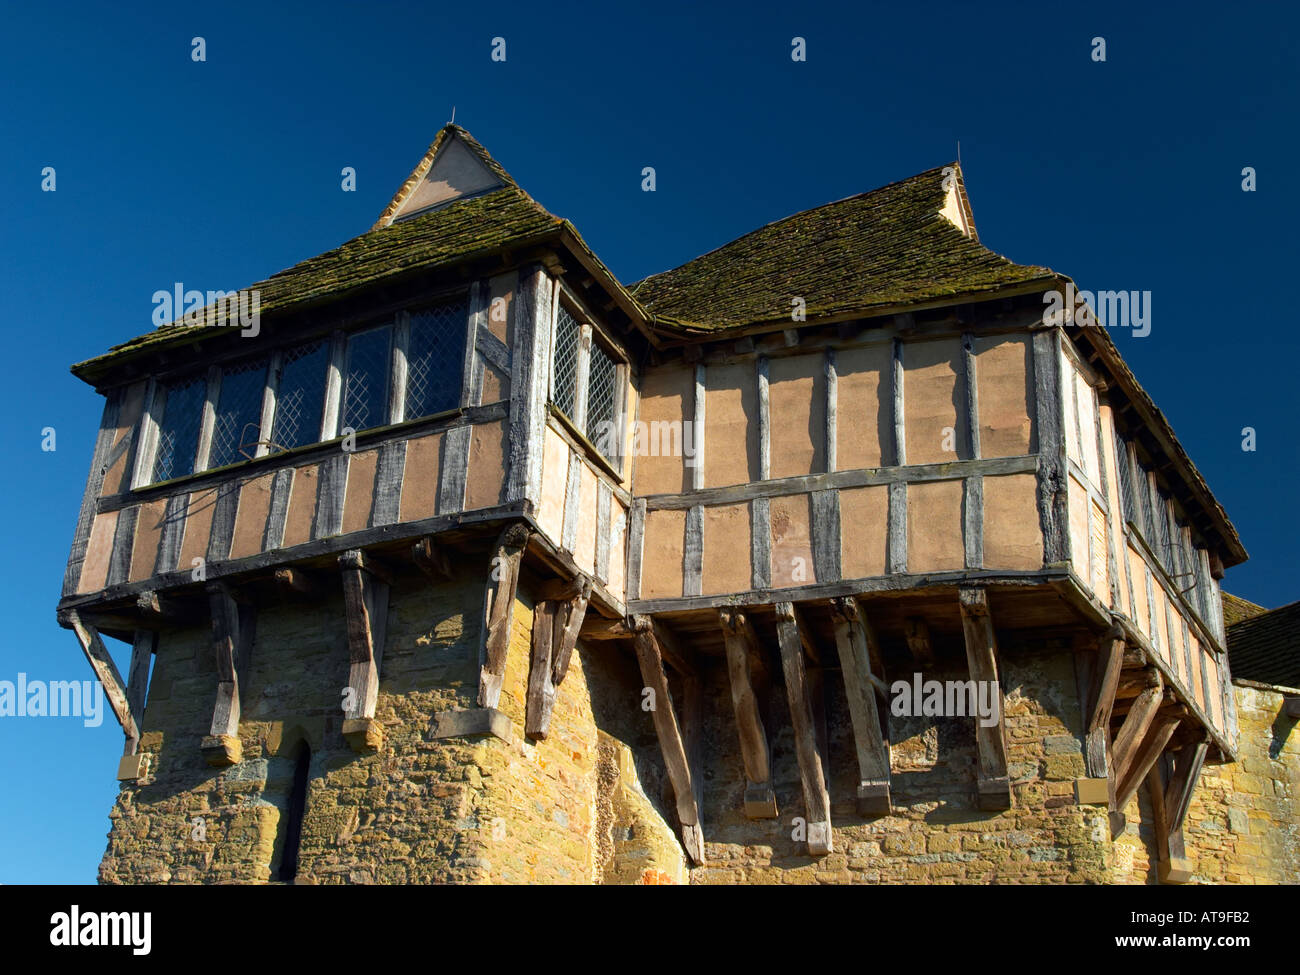 Stokesay Castle Shropshire England 13th century fortified manor house Now owned by English Heritage  Stock Photo